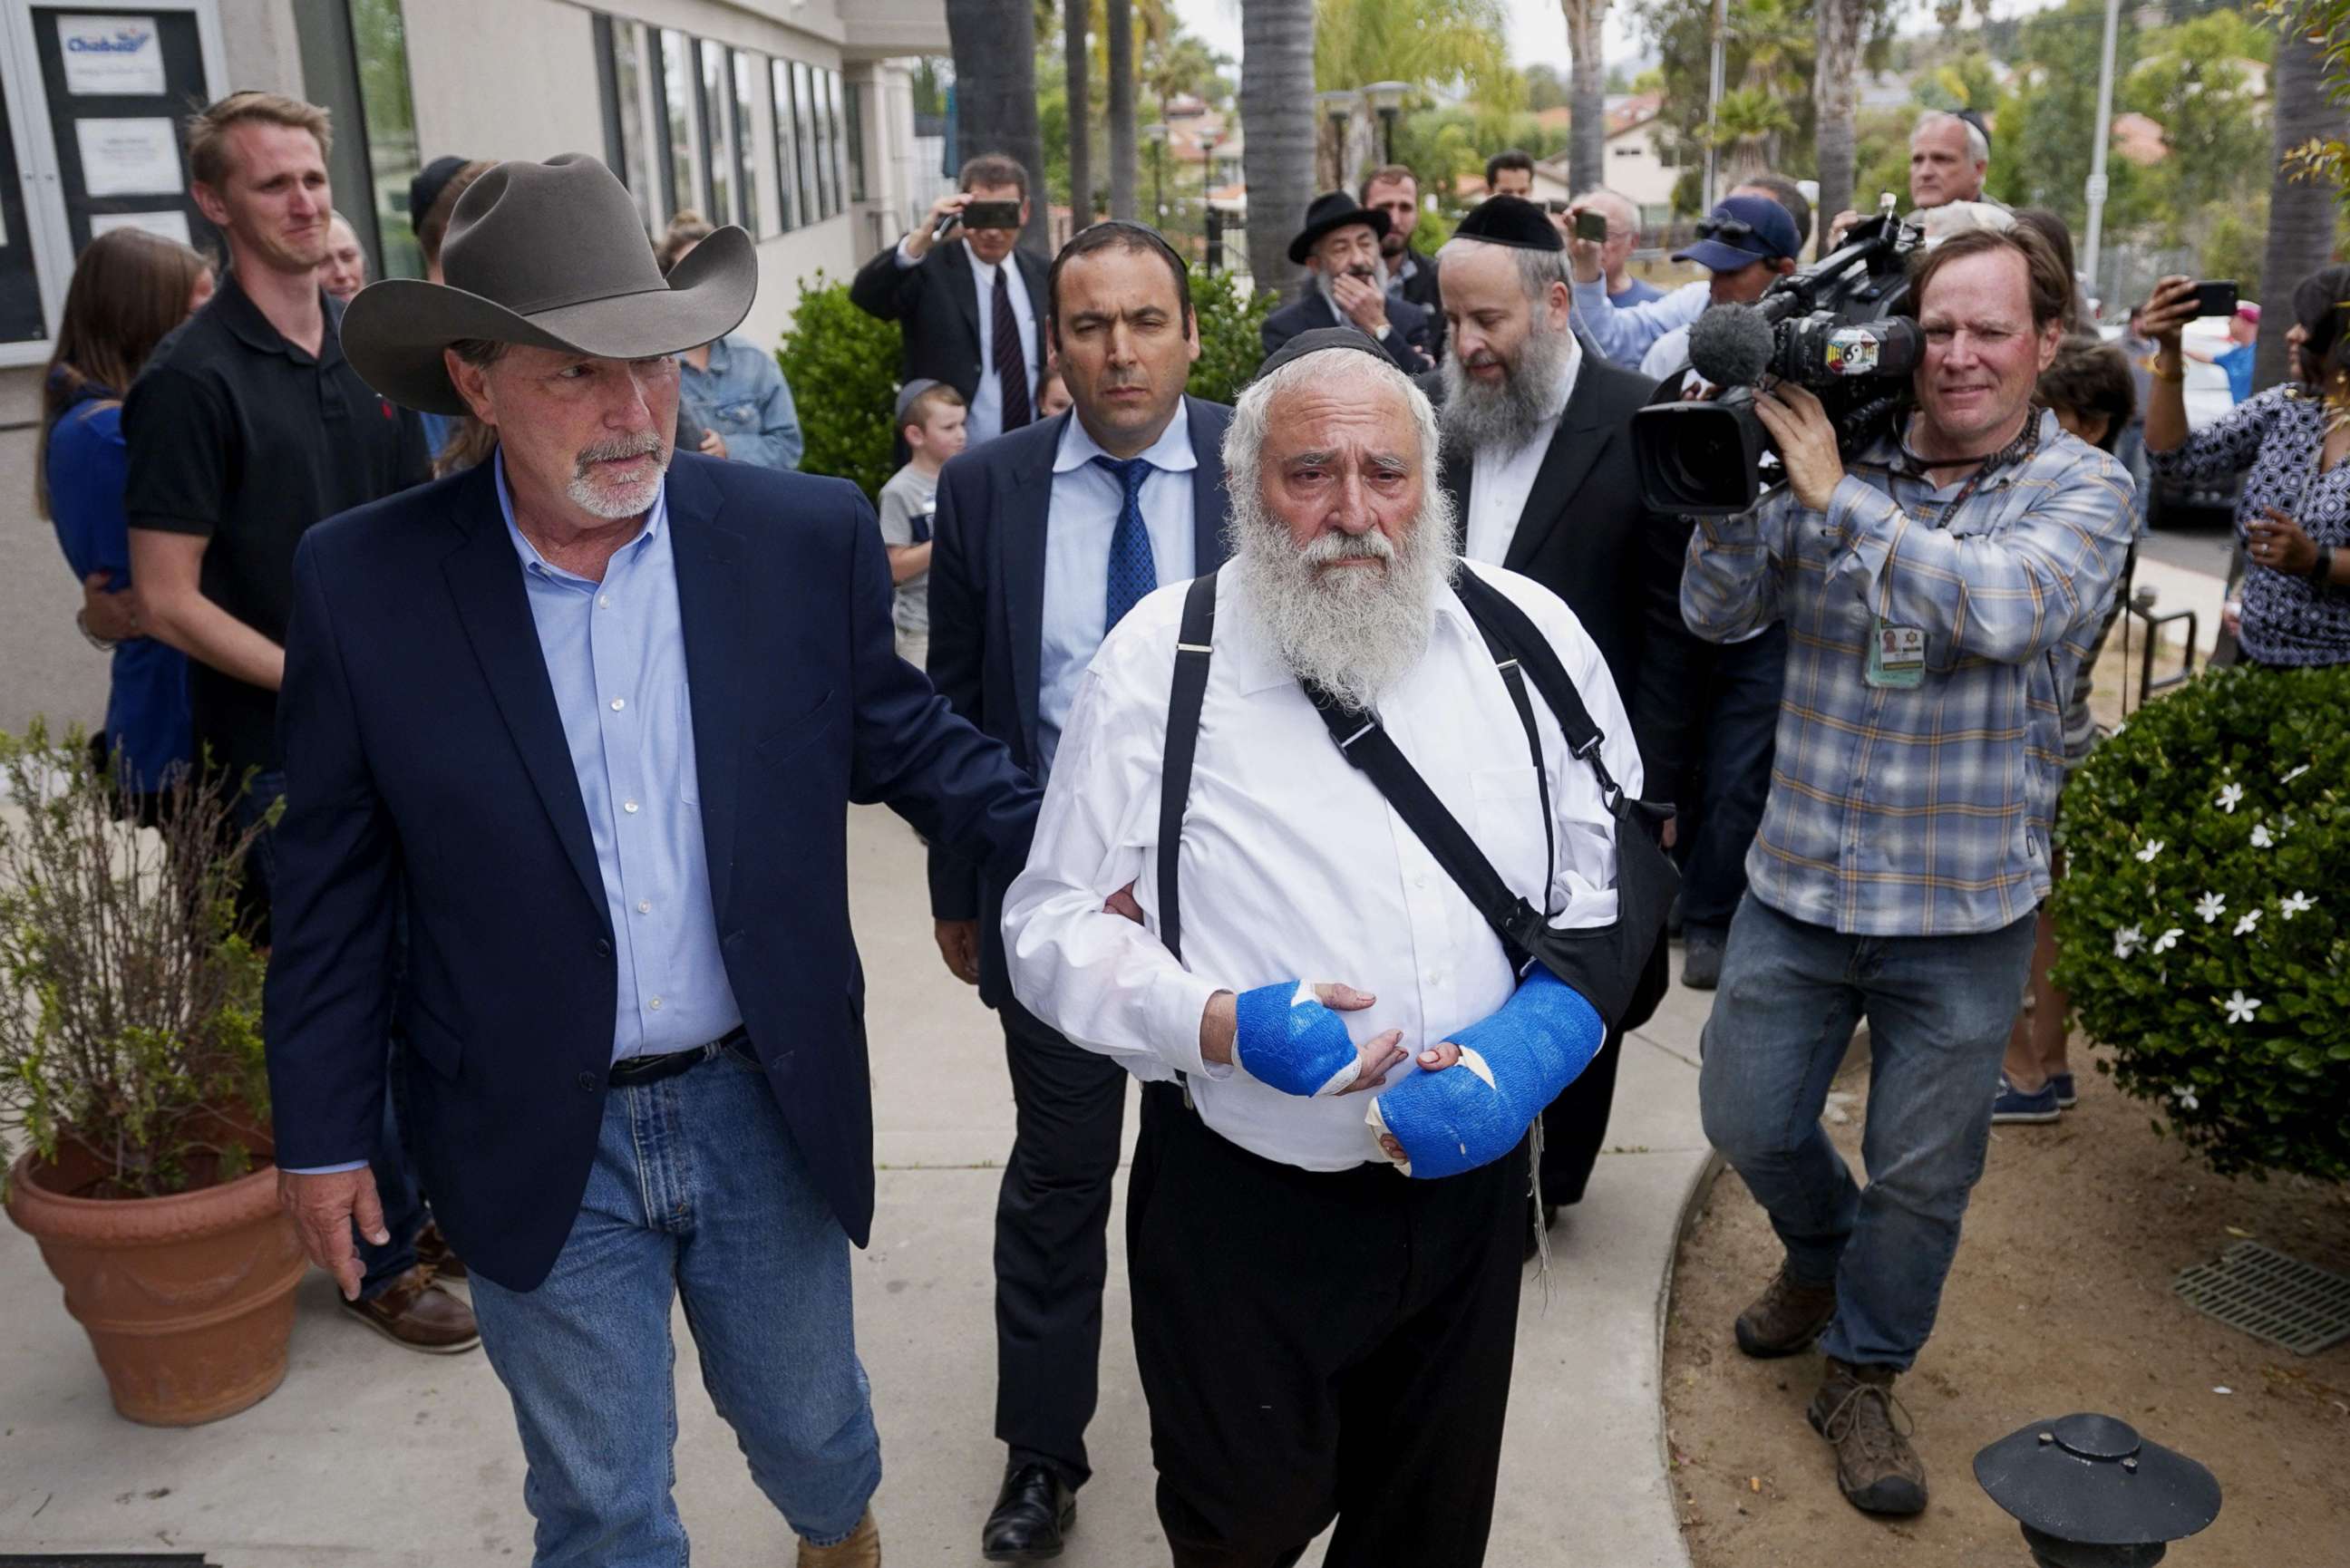 PHOTO: Executive Director Rabbi Yisroel  Goldstein, who was shot in the hands, walks towards a press conference with Poway Mayor Steve Vaus outside of the Chabad of Poway Synagogue on April 28, 2019 in Poway, Calif.